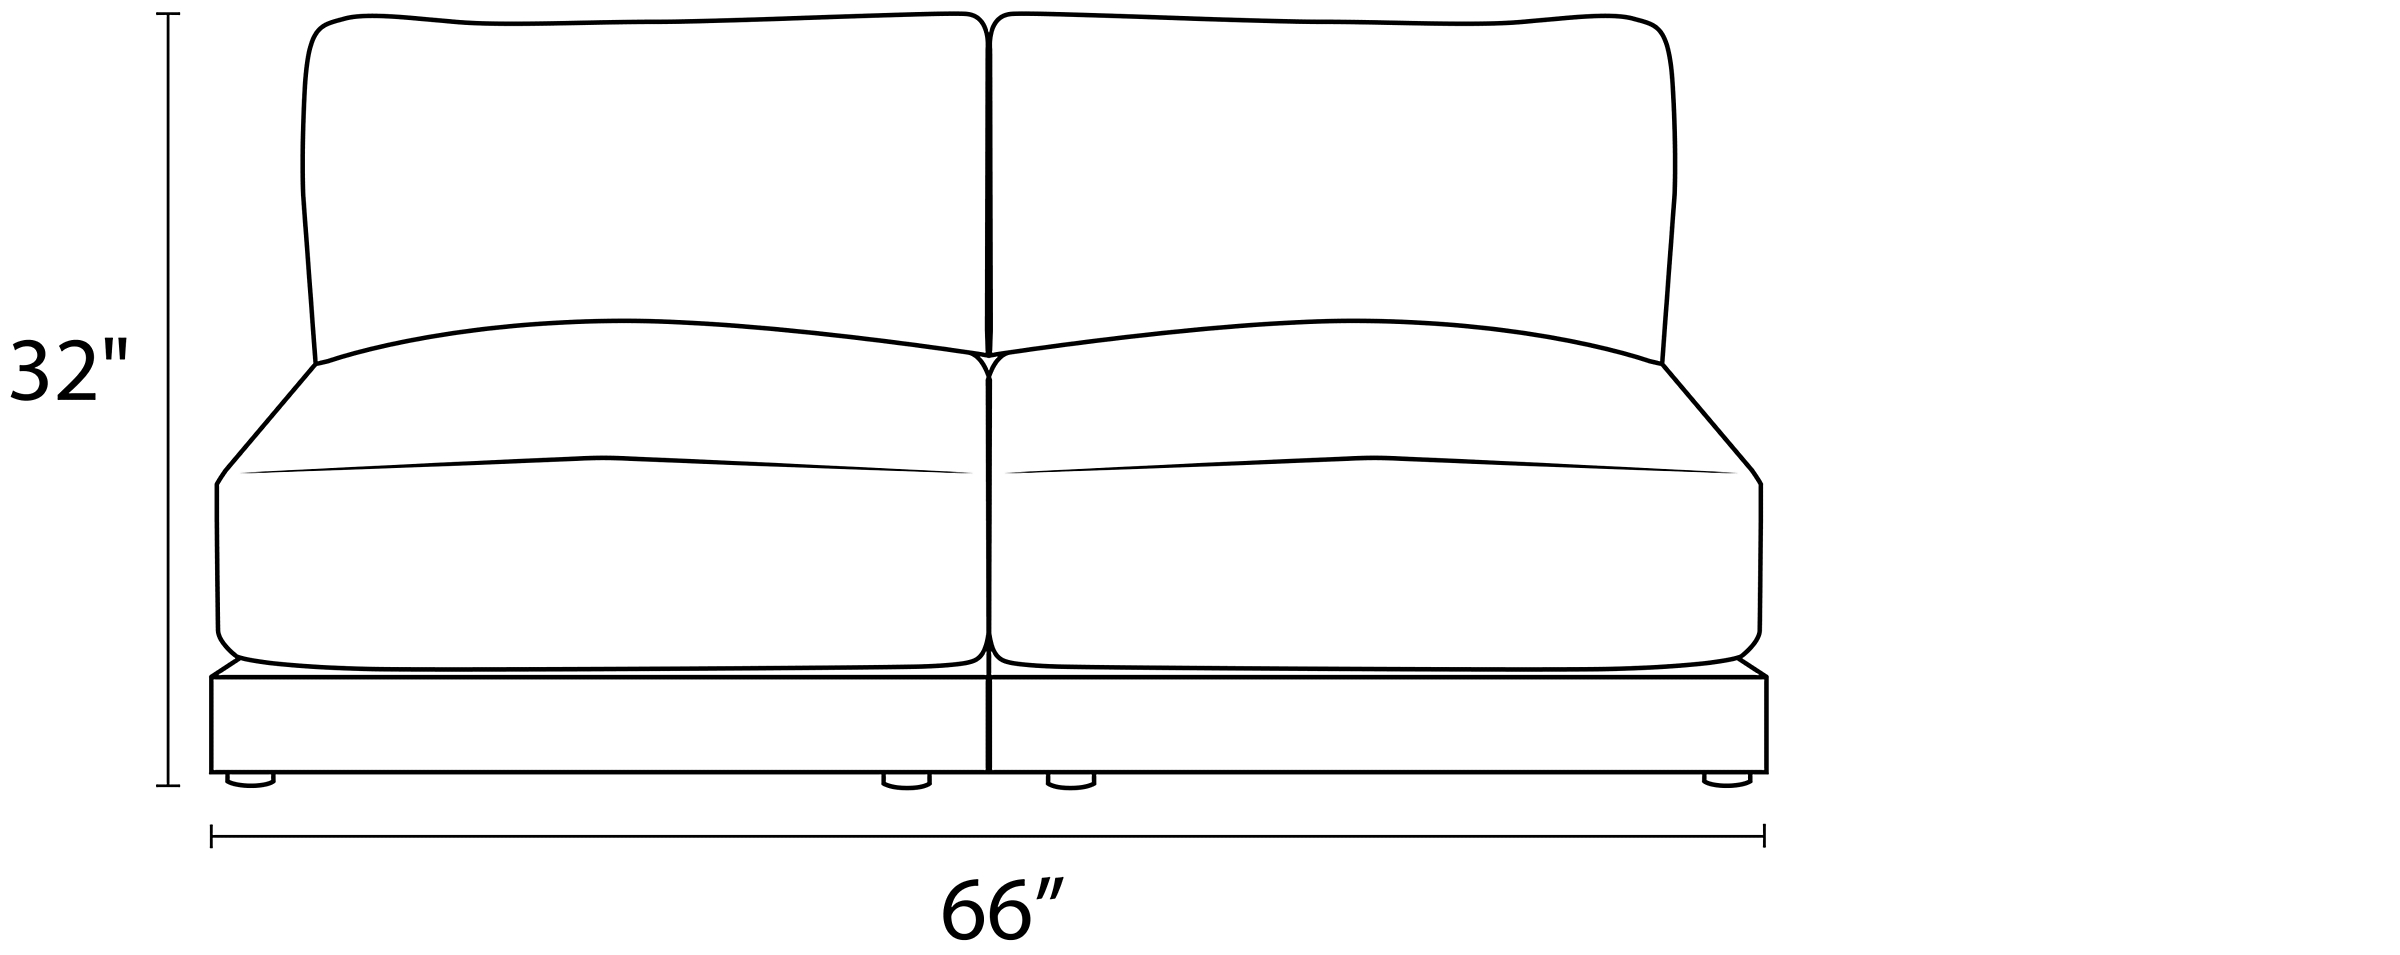 Clemens Armless Sofa Dimension Drawing.